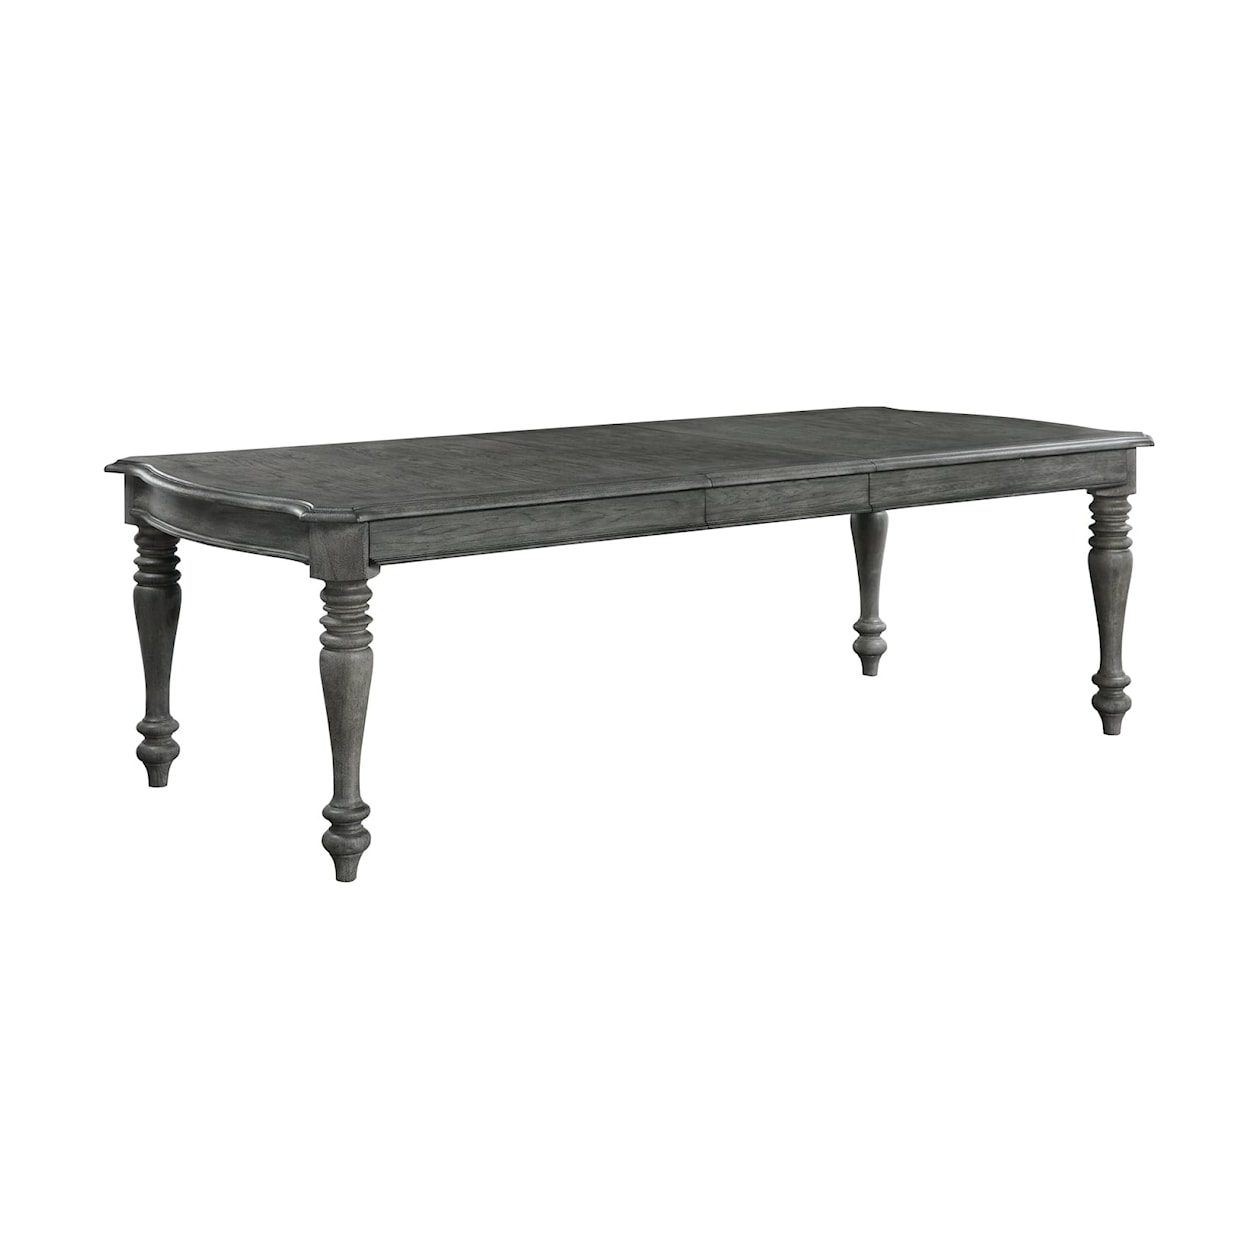 Avalon Furniture Lakeway-D01623 Dining Table